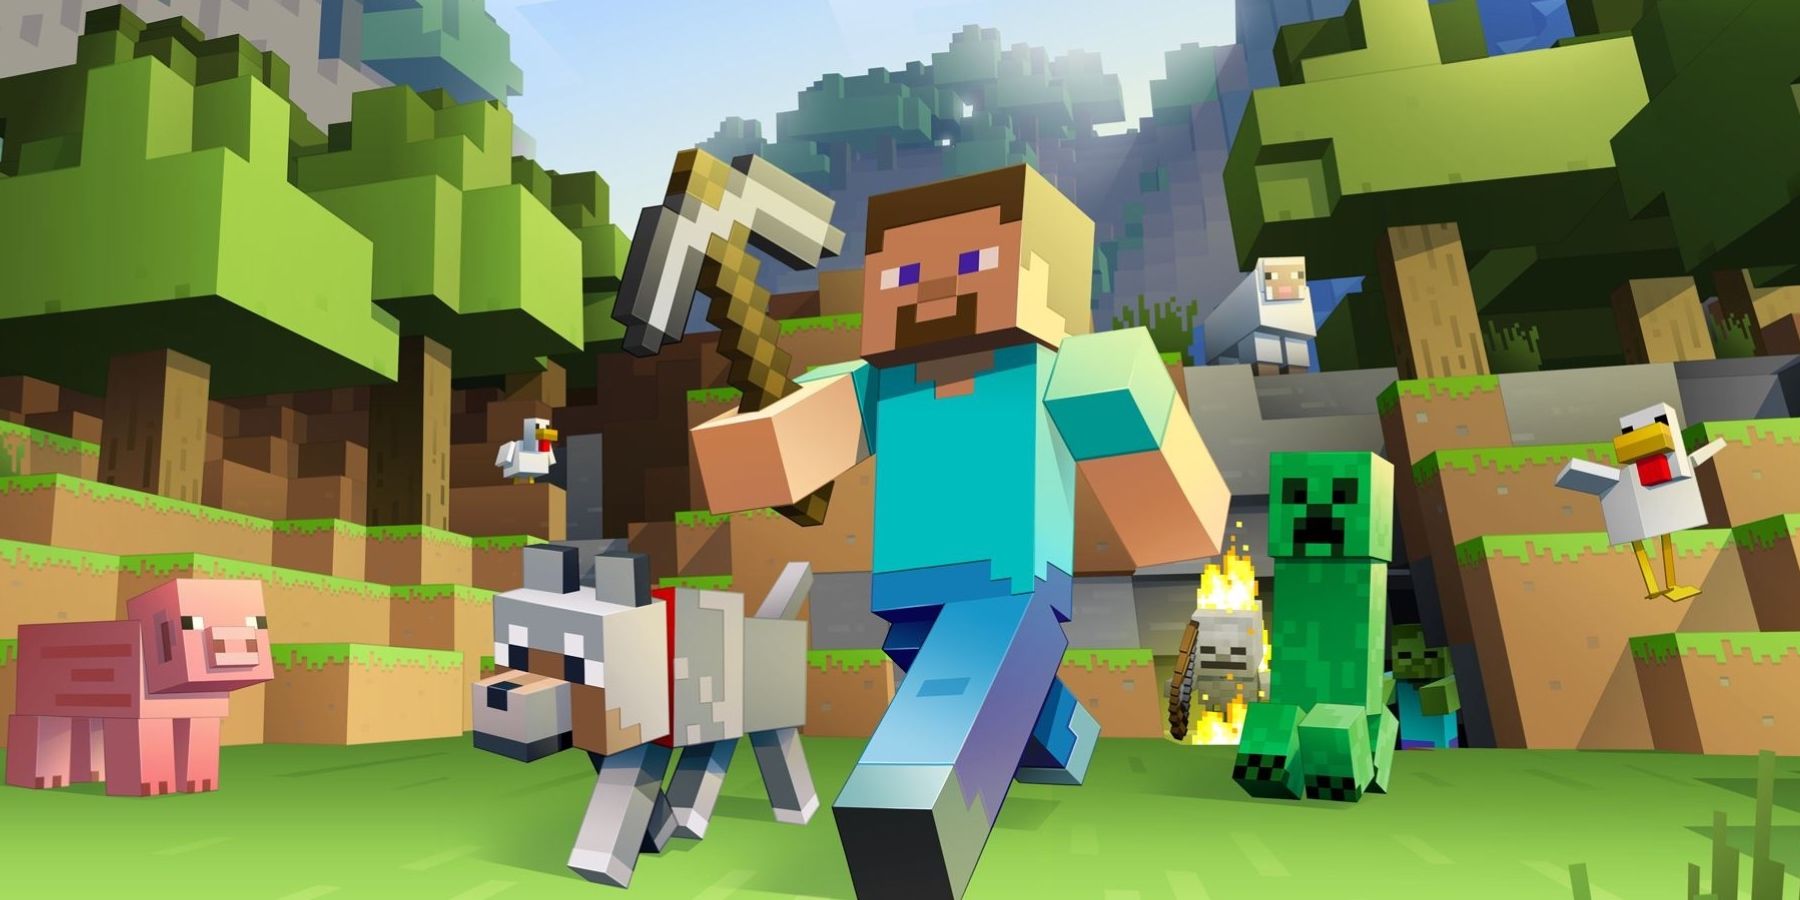 Steve and a dog being chased by a Creeper in Minecraft